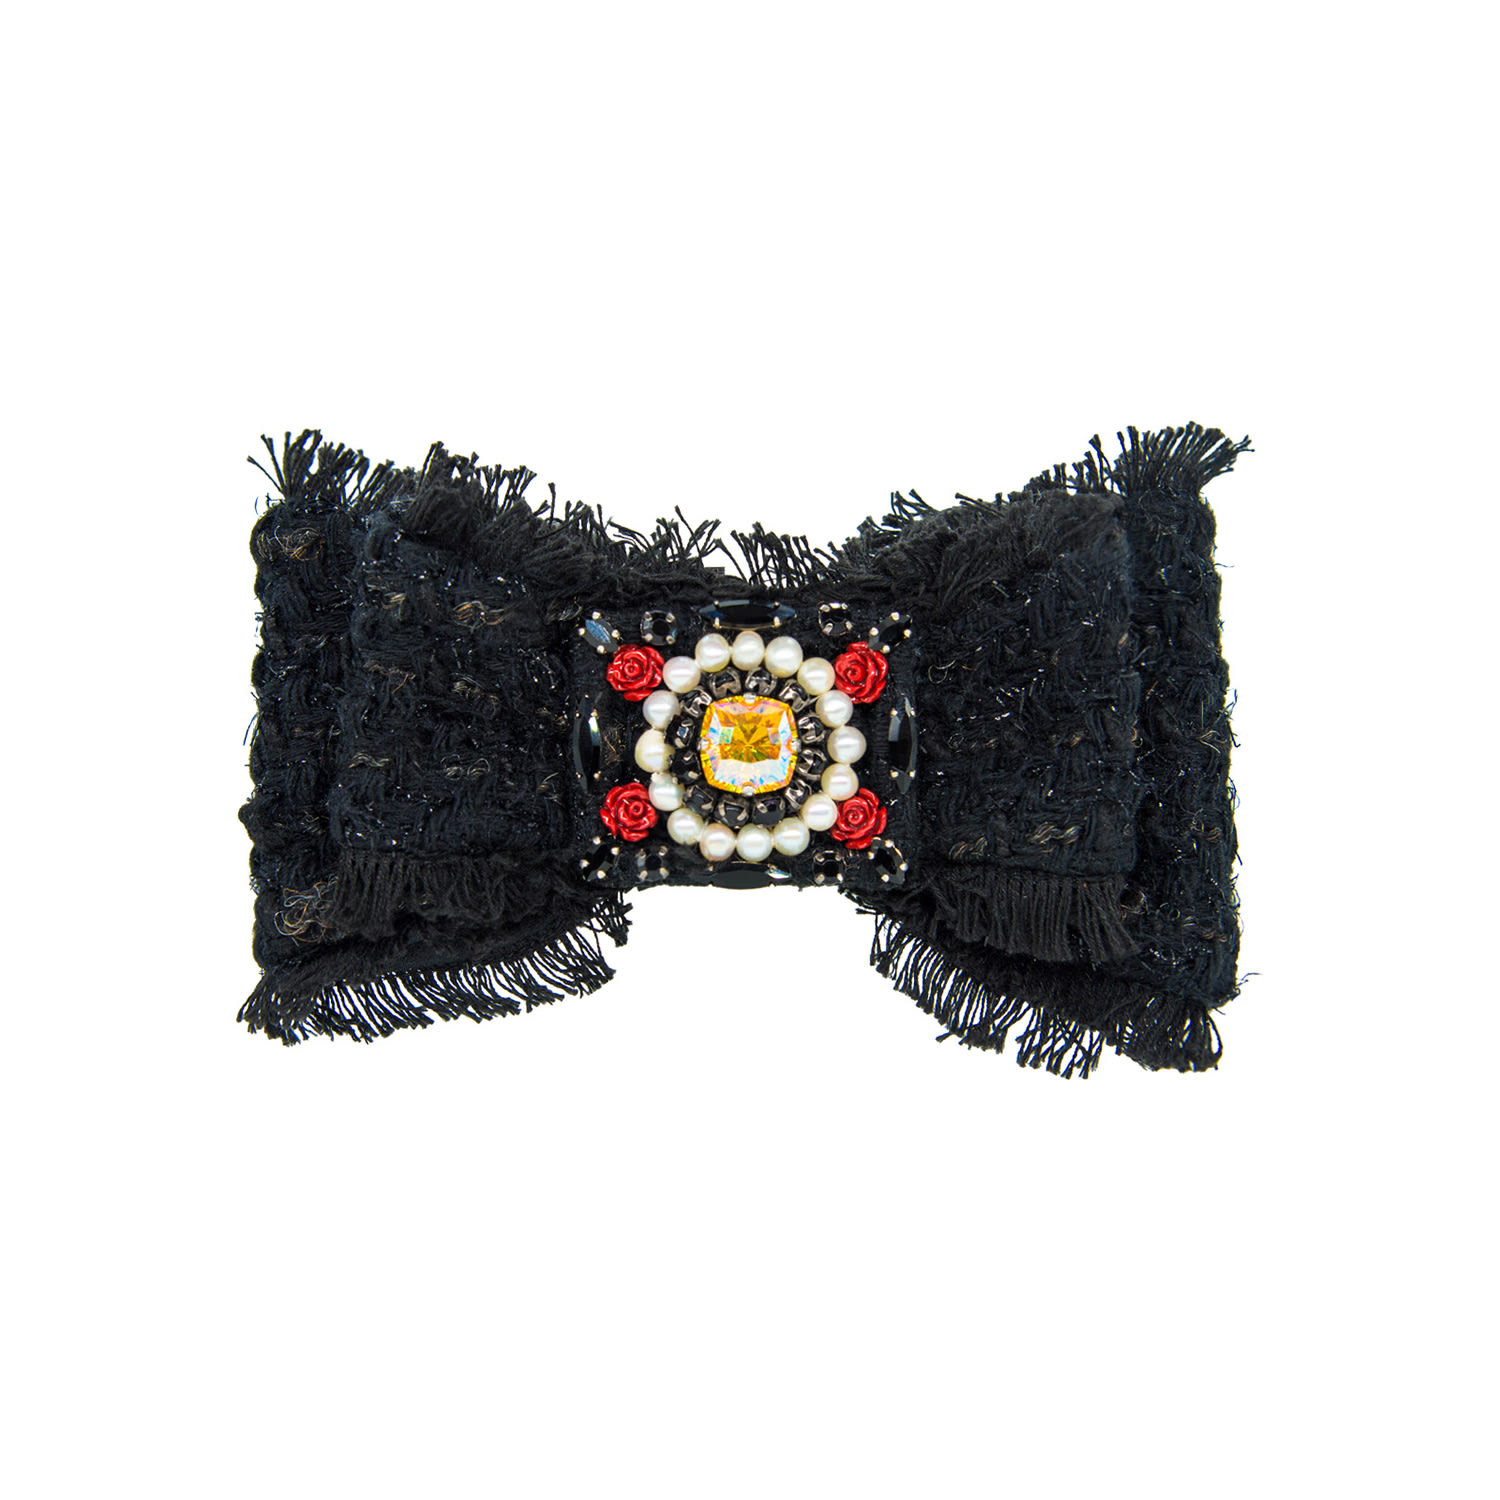 Rua & Rua Women's Black Bouclé Tweed Bow Brooch With Pearls And Crystals